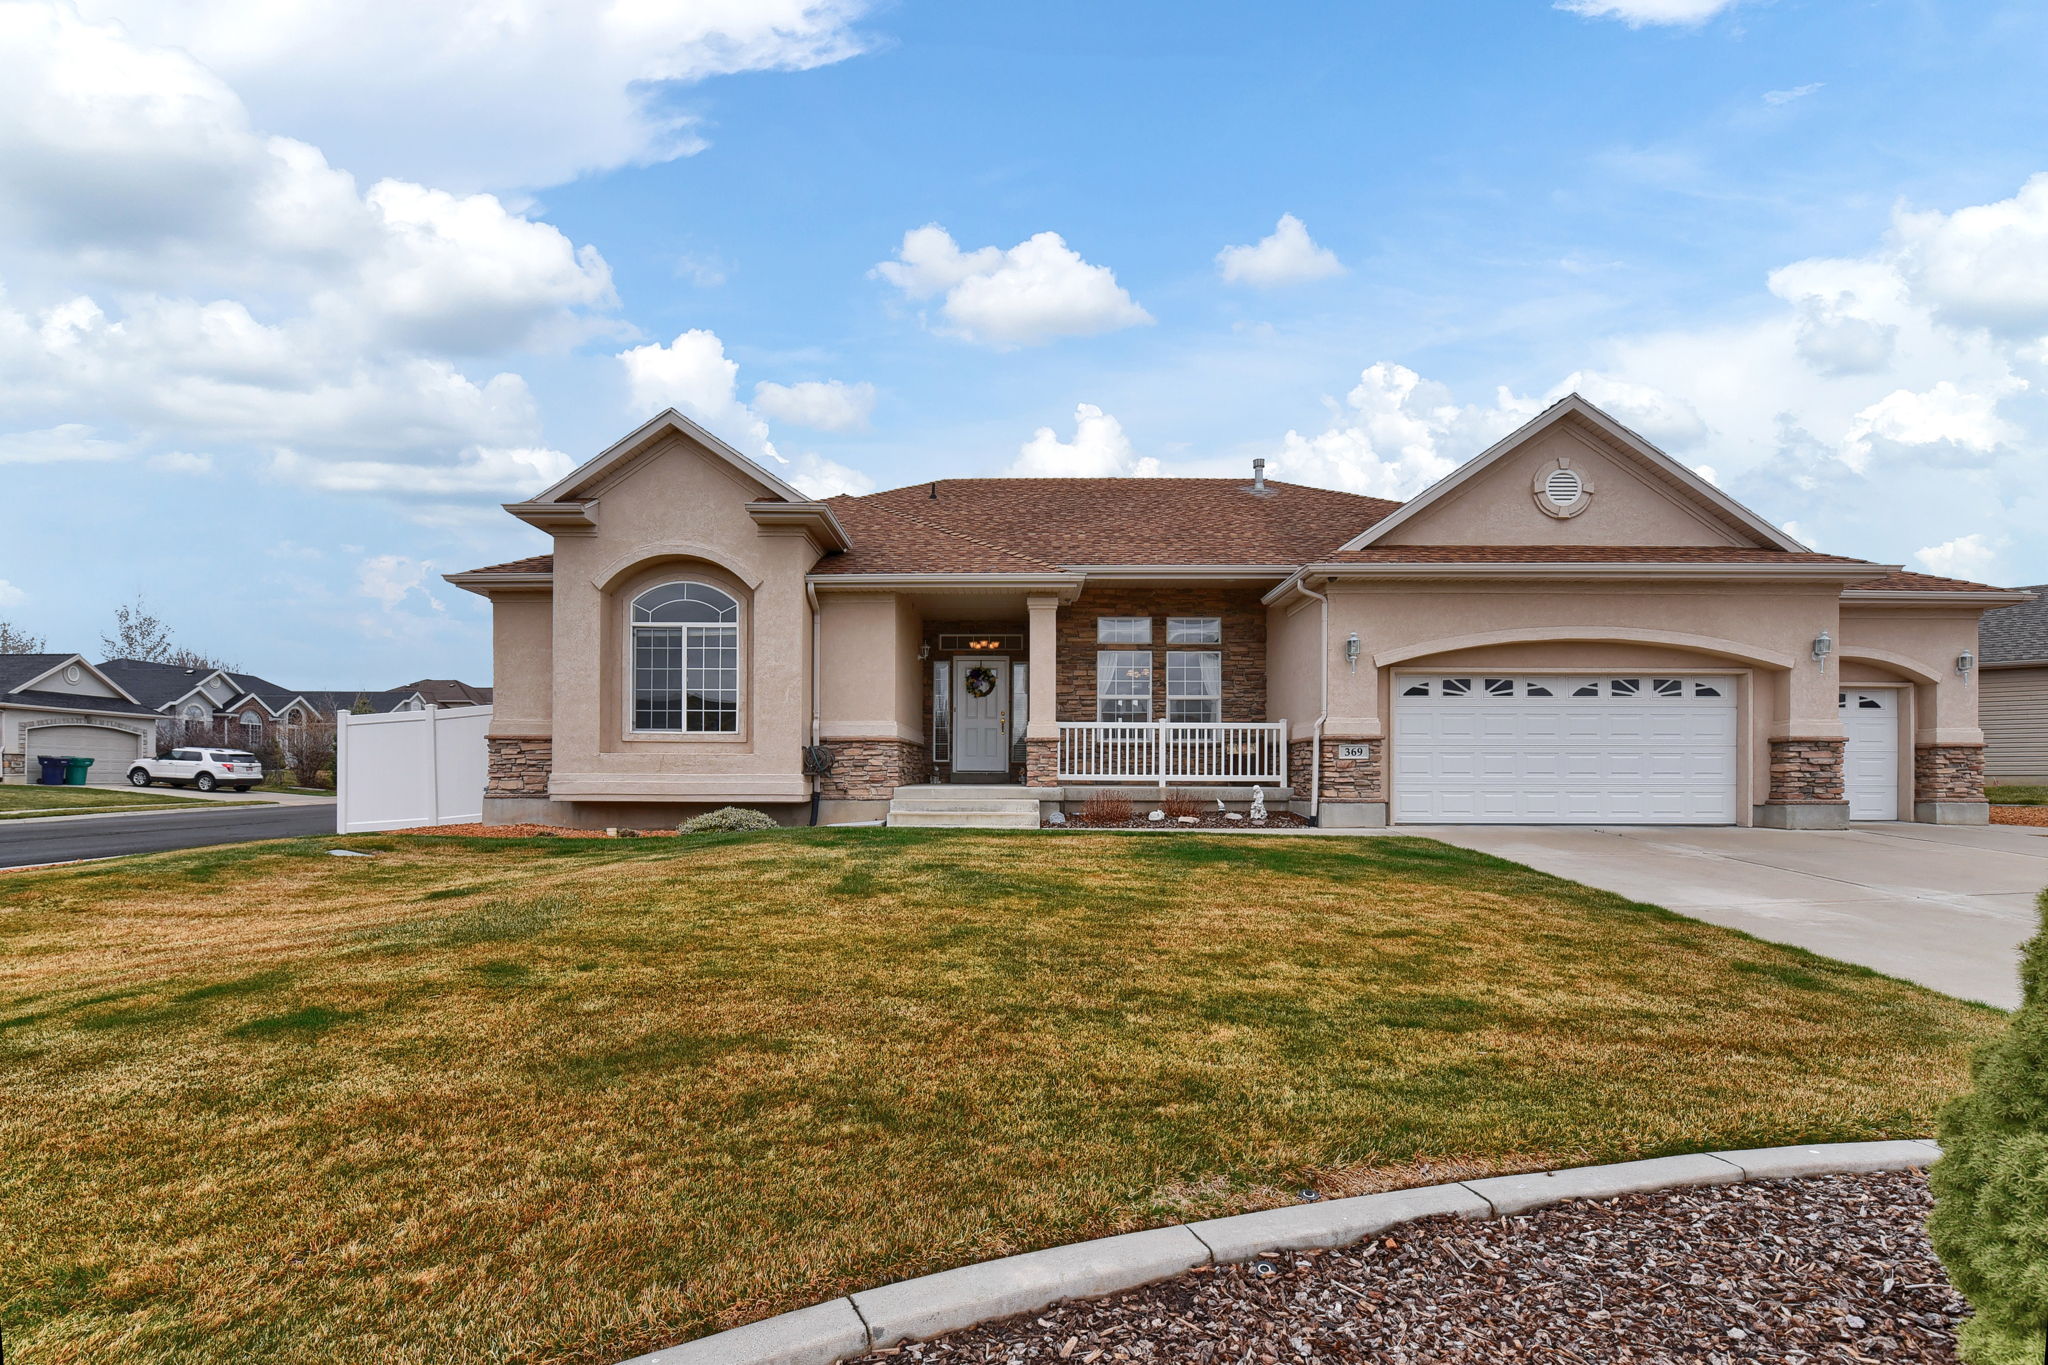  369 E 2200 S, Clearfield, UT 84015, US